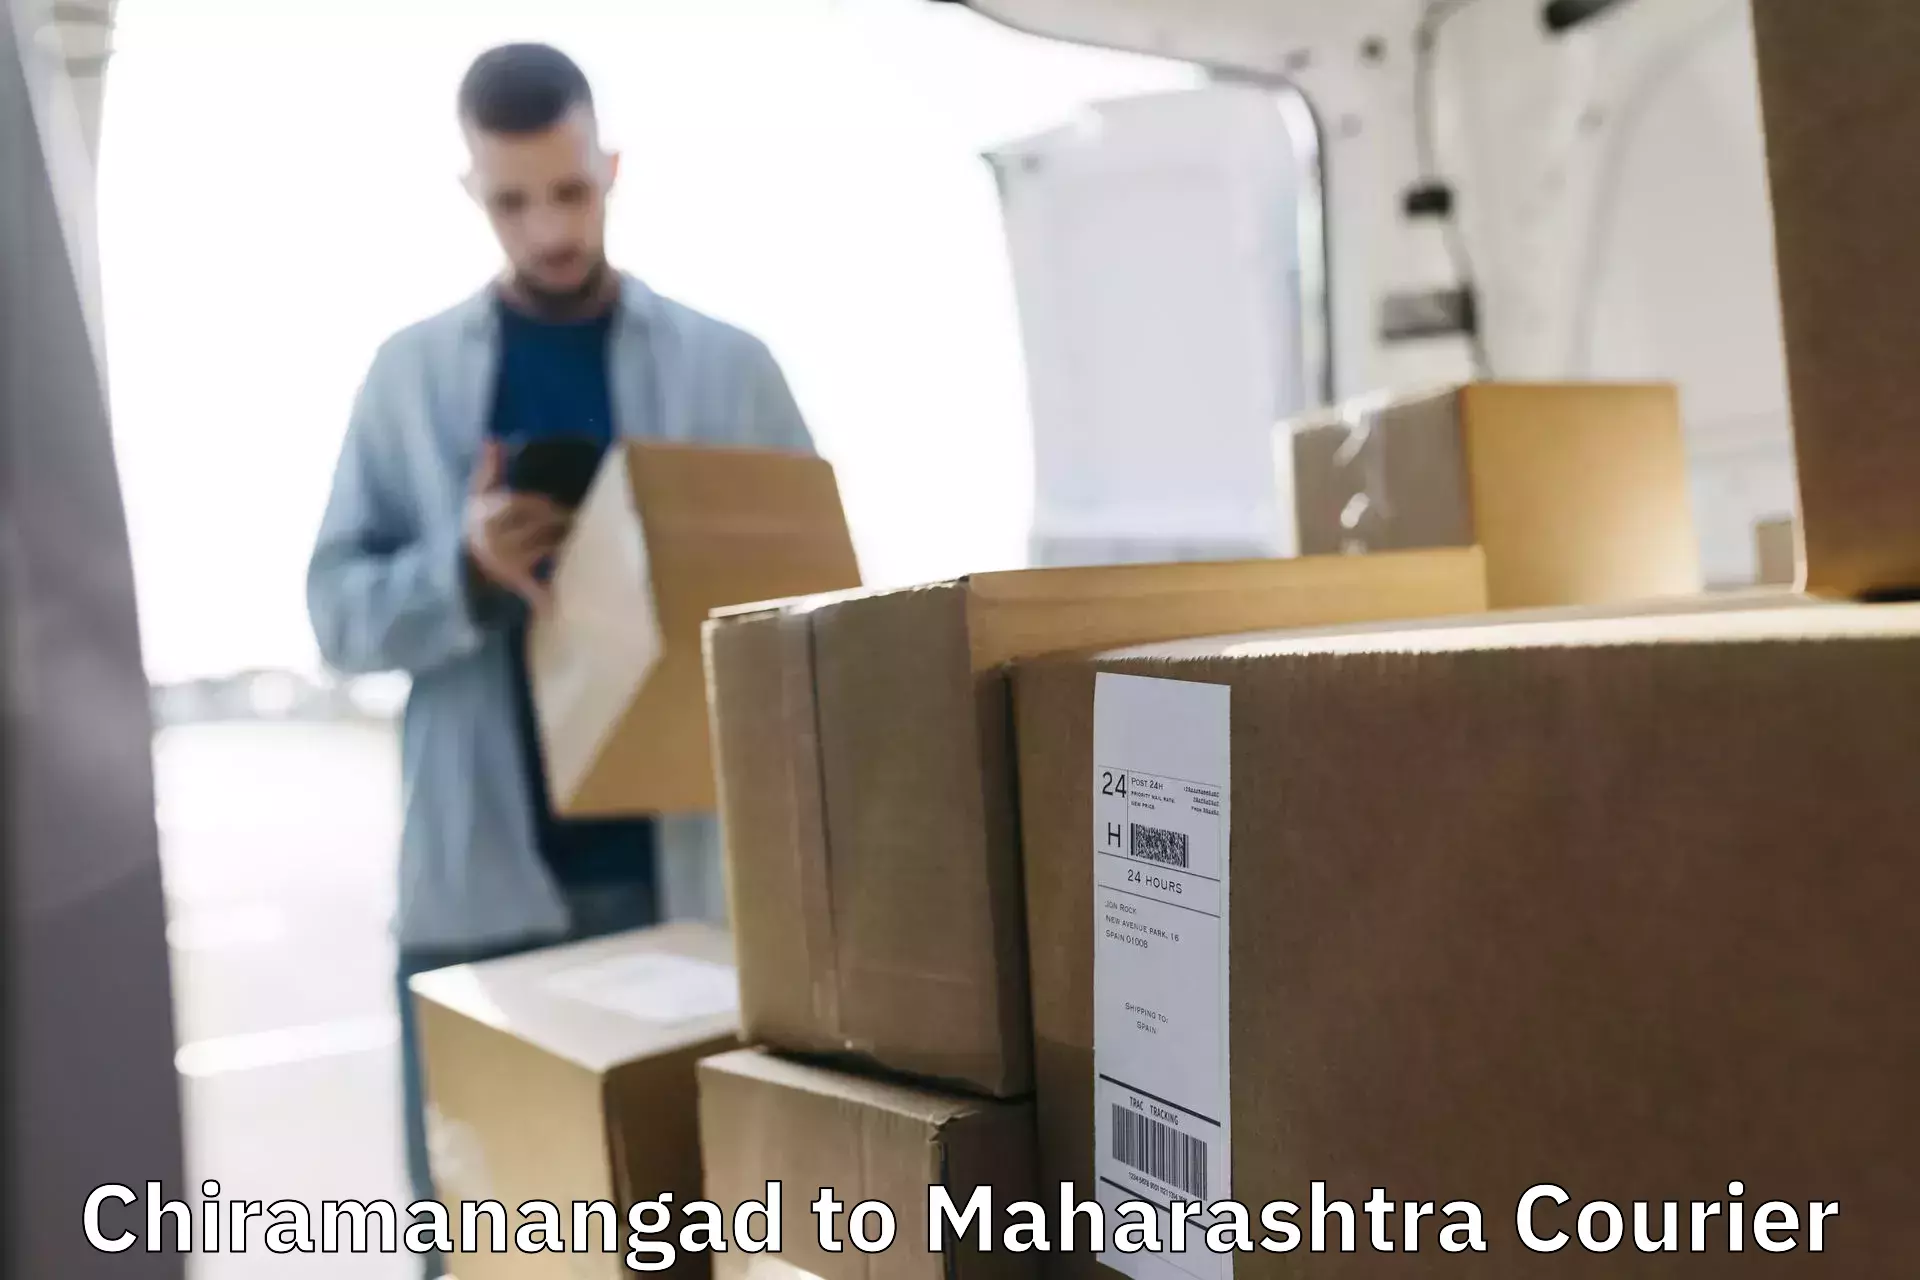 Sustainable courier practices in Chiramanangad to Maharashtra